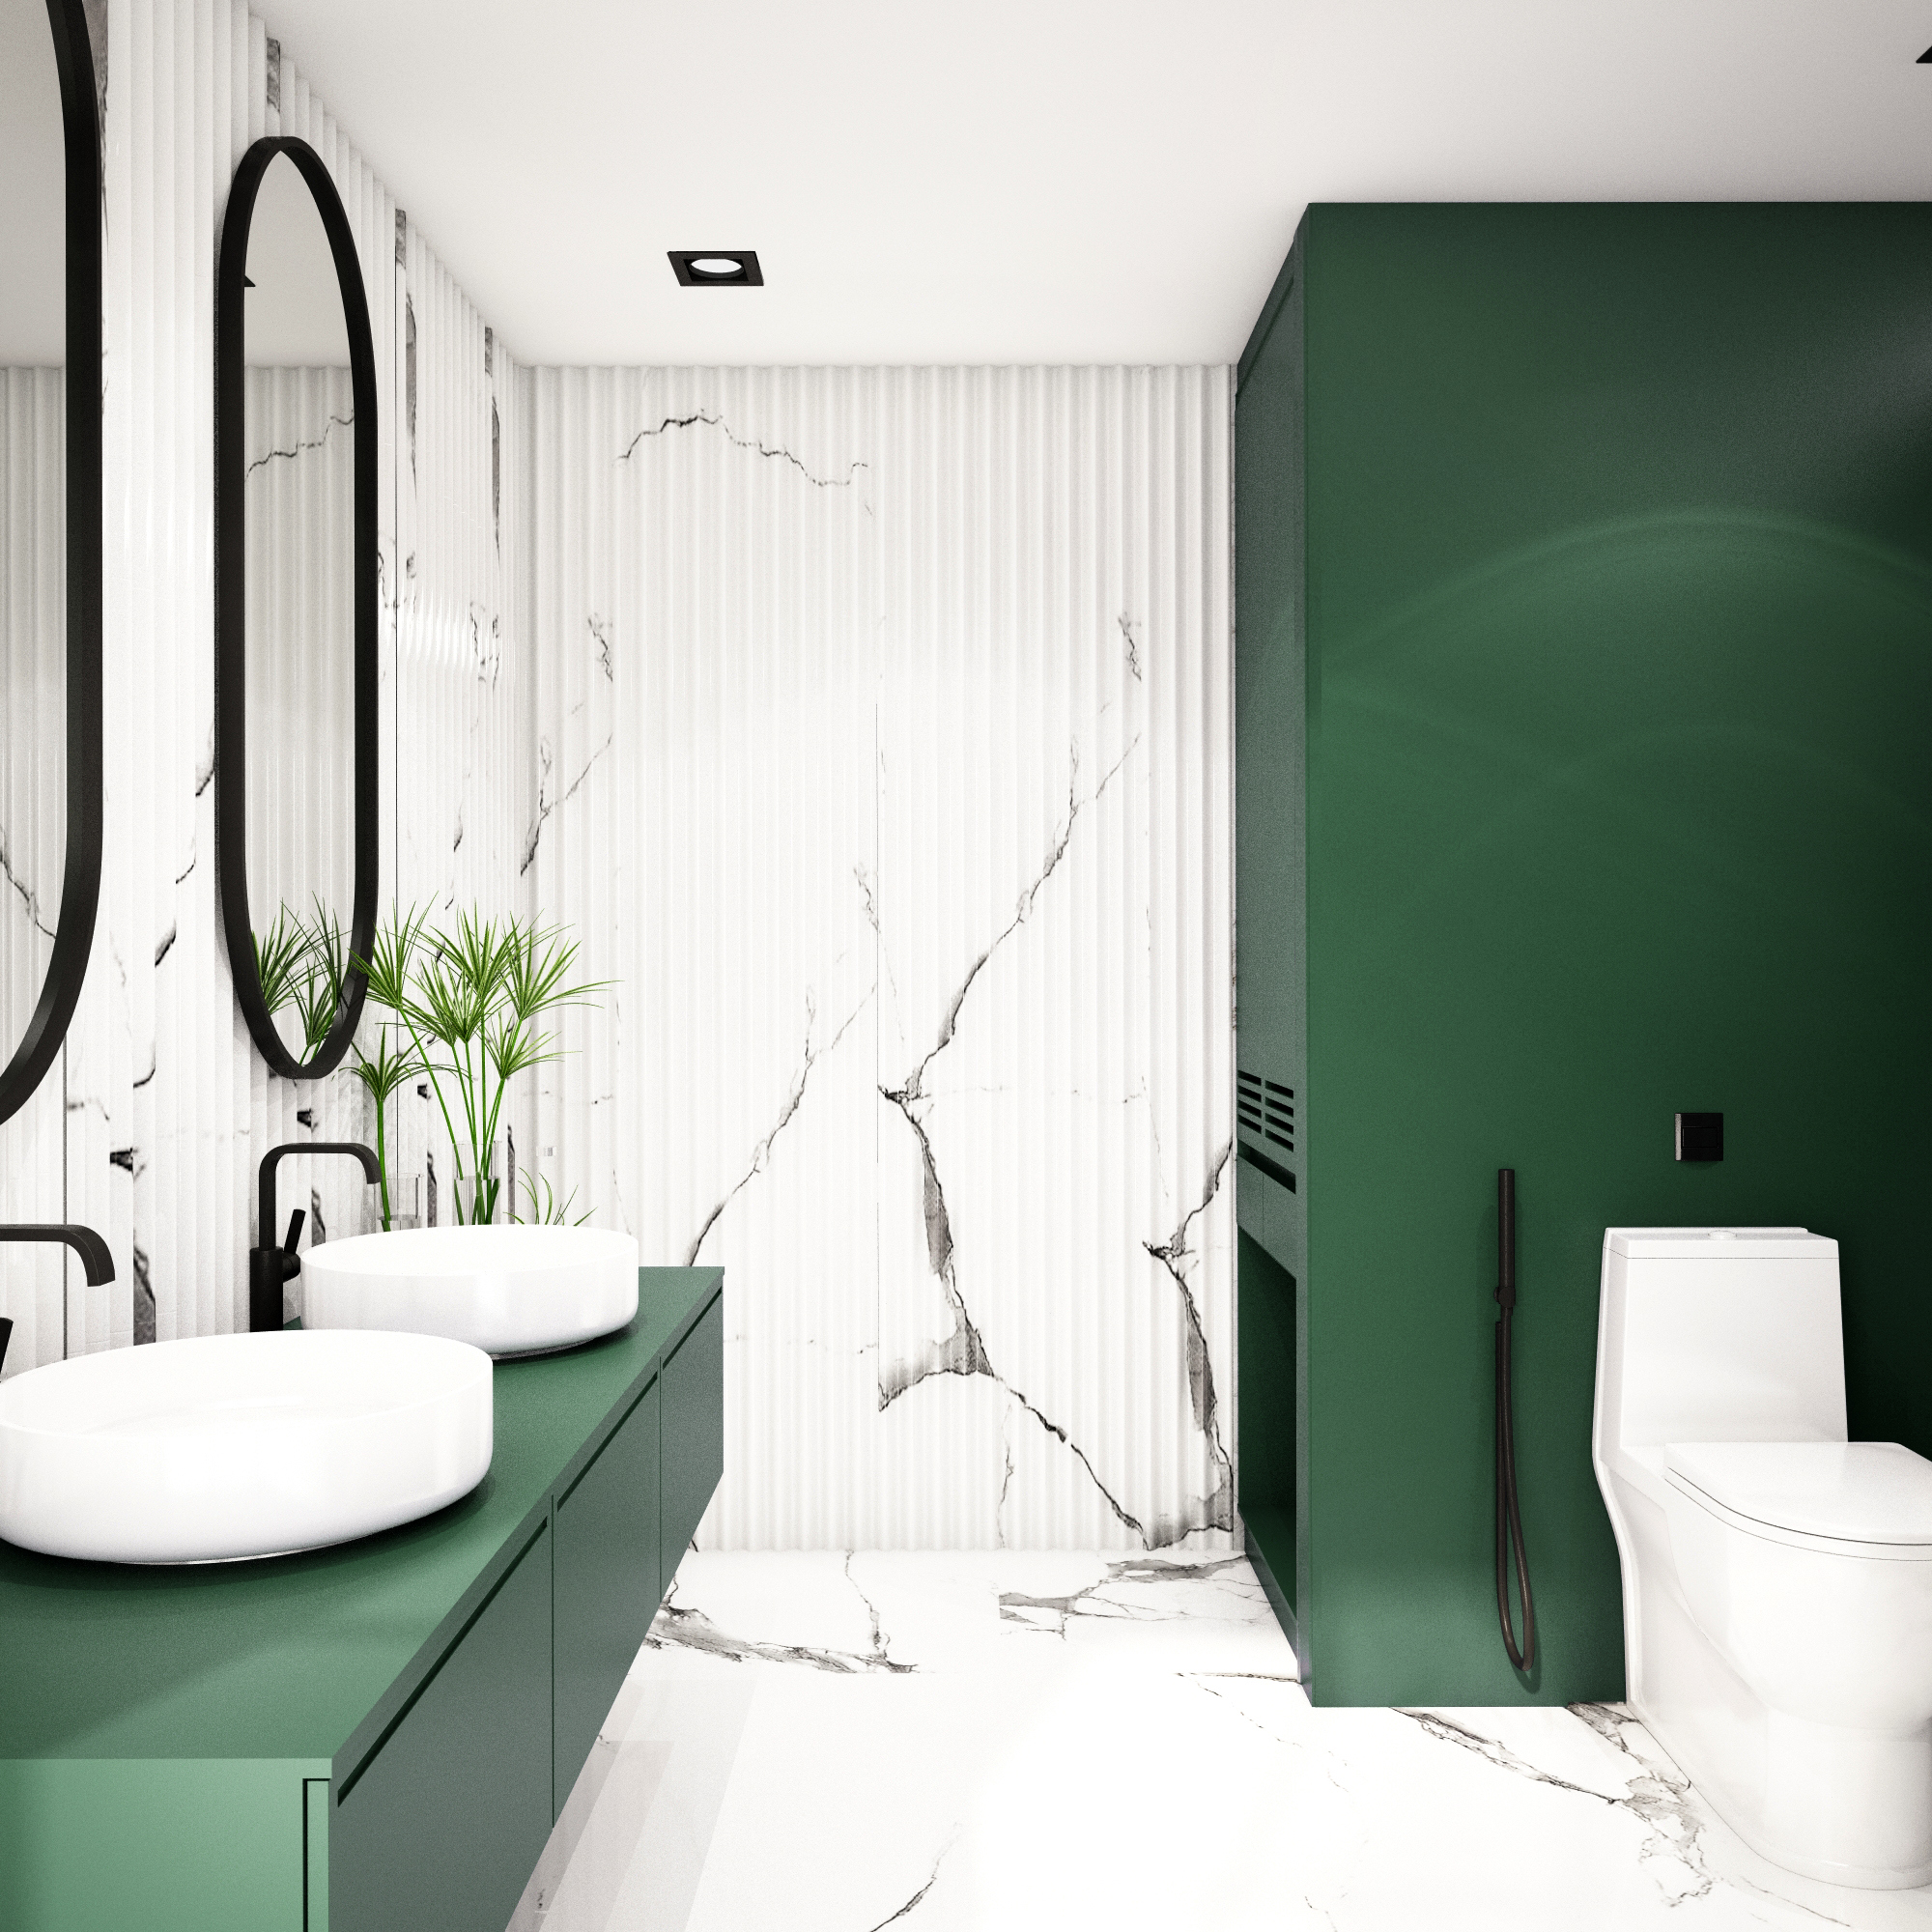 Forest green brings depth to a small bathroom when paired with gold fixtures, balanced by lighter tones.